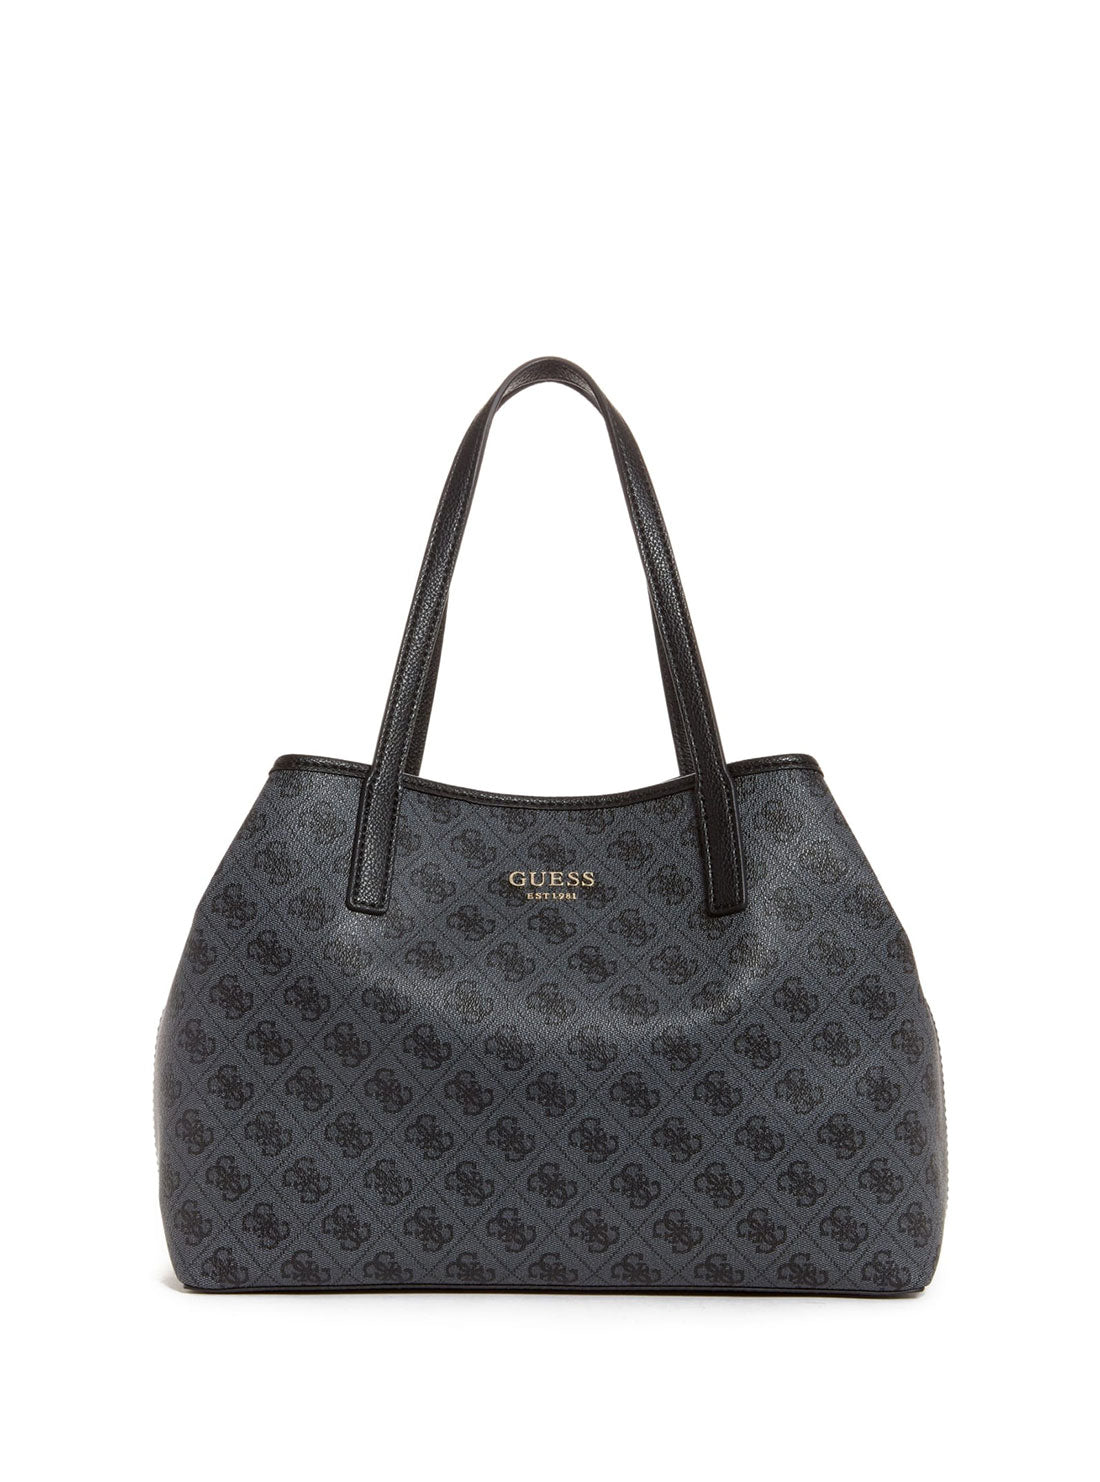 Guess Vikky Tote Bag In Coal For Women